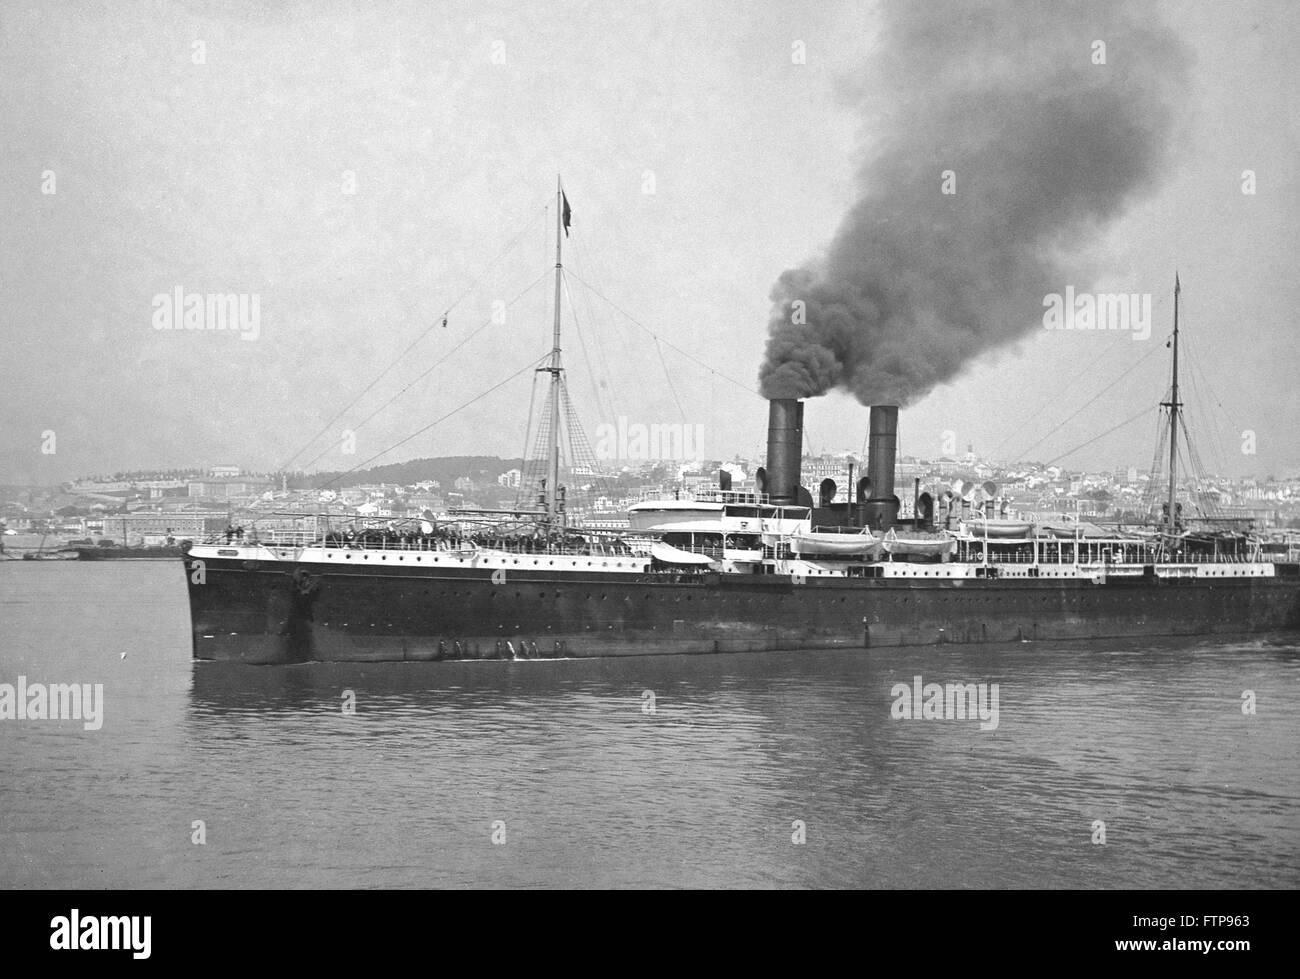 AJAXNETPHOTO.1905 - 1912 (APPROX). LISBON, PORTUGAL. - STEAMSHIP UNDER WAY - FRENCH MESSAGERIES MARITIME LINER AMZONE (EX LAOS) OR ANNAM MAKING SMOKE AS IT LEAVES HARBOUR LOADED WITH PASSENGERS. SHIP WAS EMPLOYED ON BORDEAUX TO LA PLATA (S.A.) RUN AT THIS TIME. RESCUED PASSENGERS FROM THE AUSTRAL IN 1907. PHOTO:AJAX VINTAGE PICTURE LIBRARY  REF:AVL MAIL SHIP 1910 Stock Photo